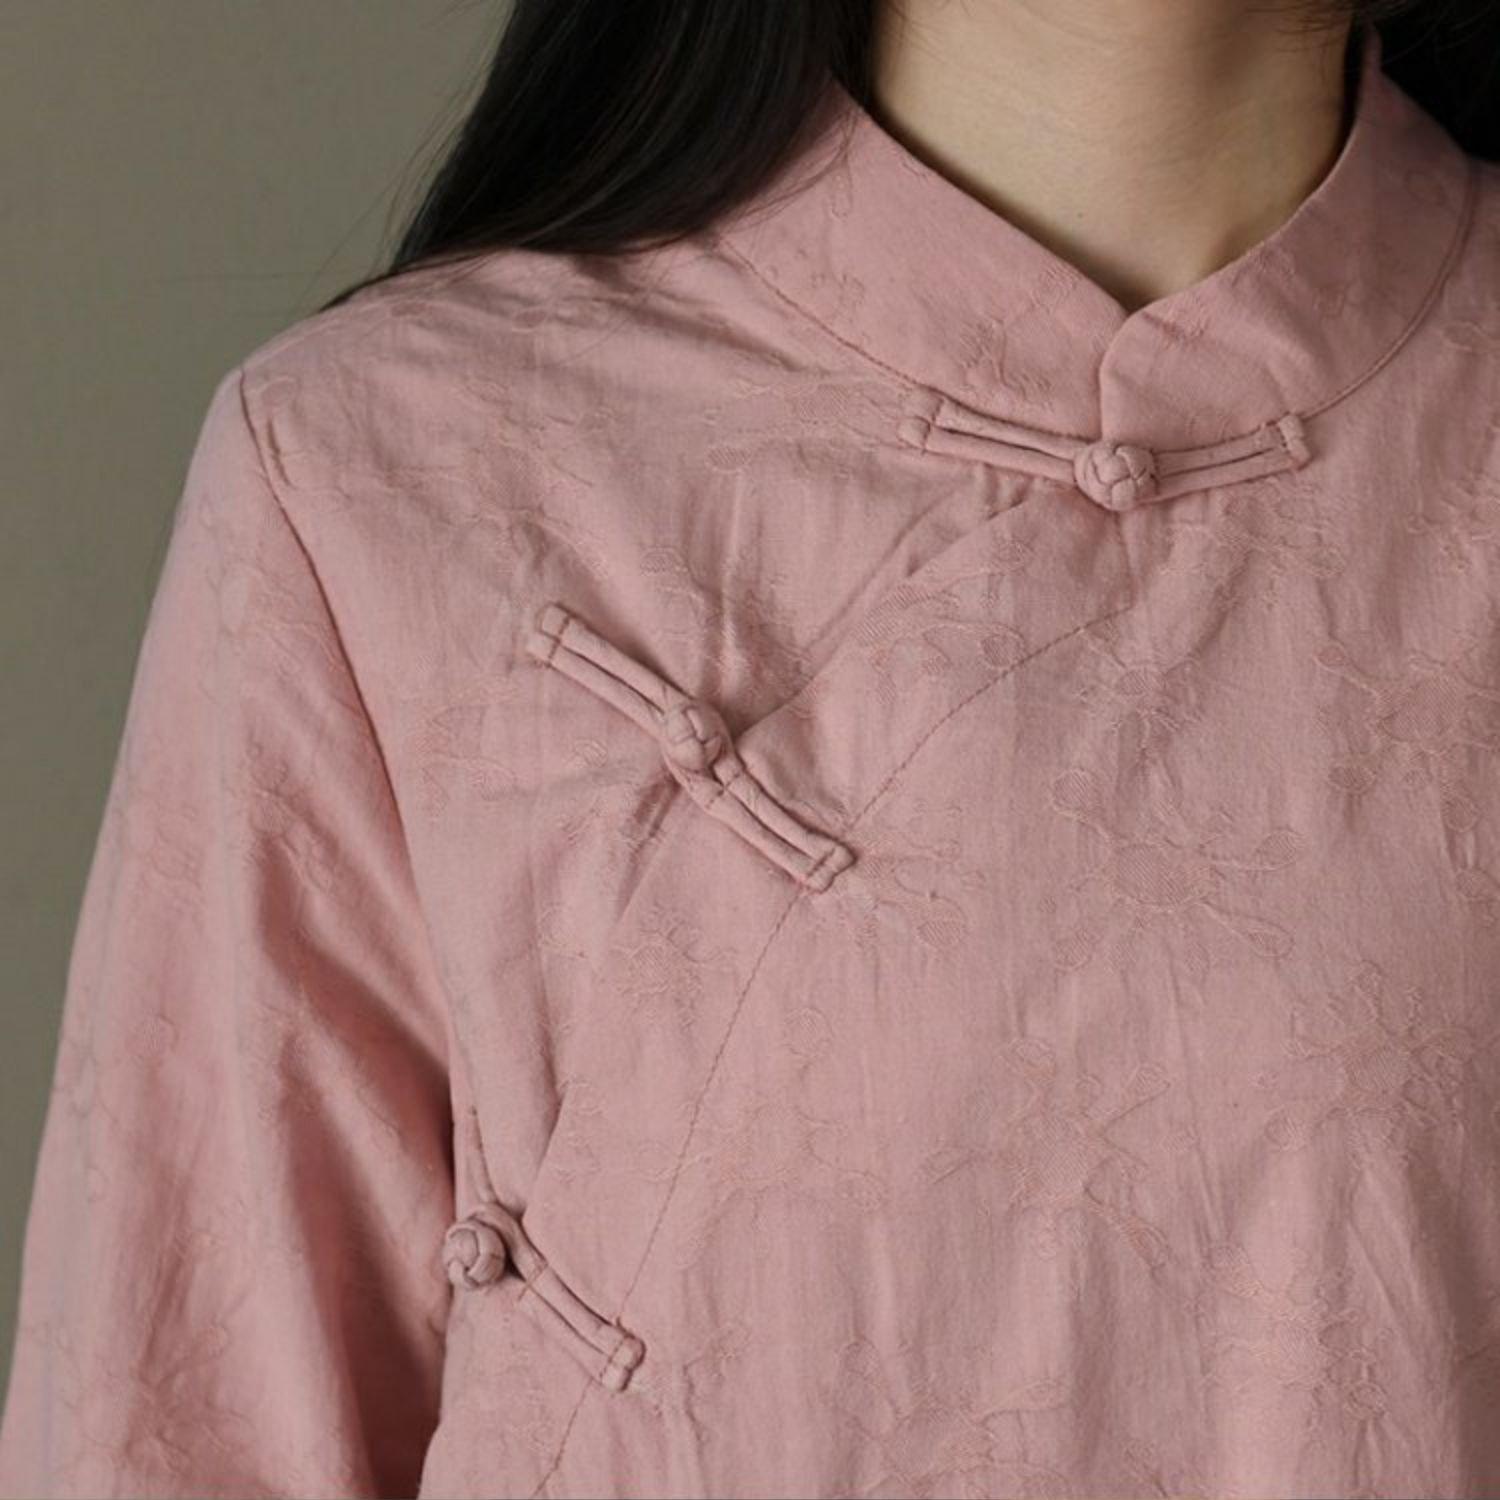 French Chinese Button cotton spring clothes For Women linen pink Dresses - Omychic